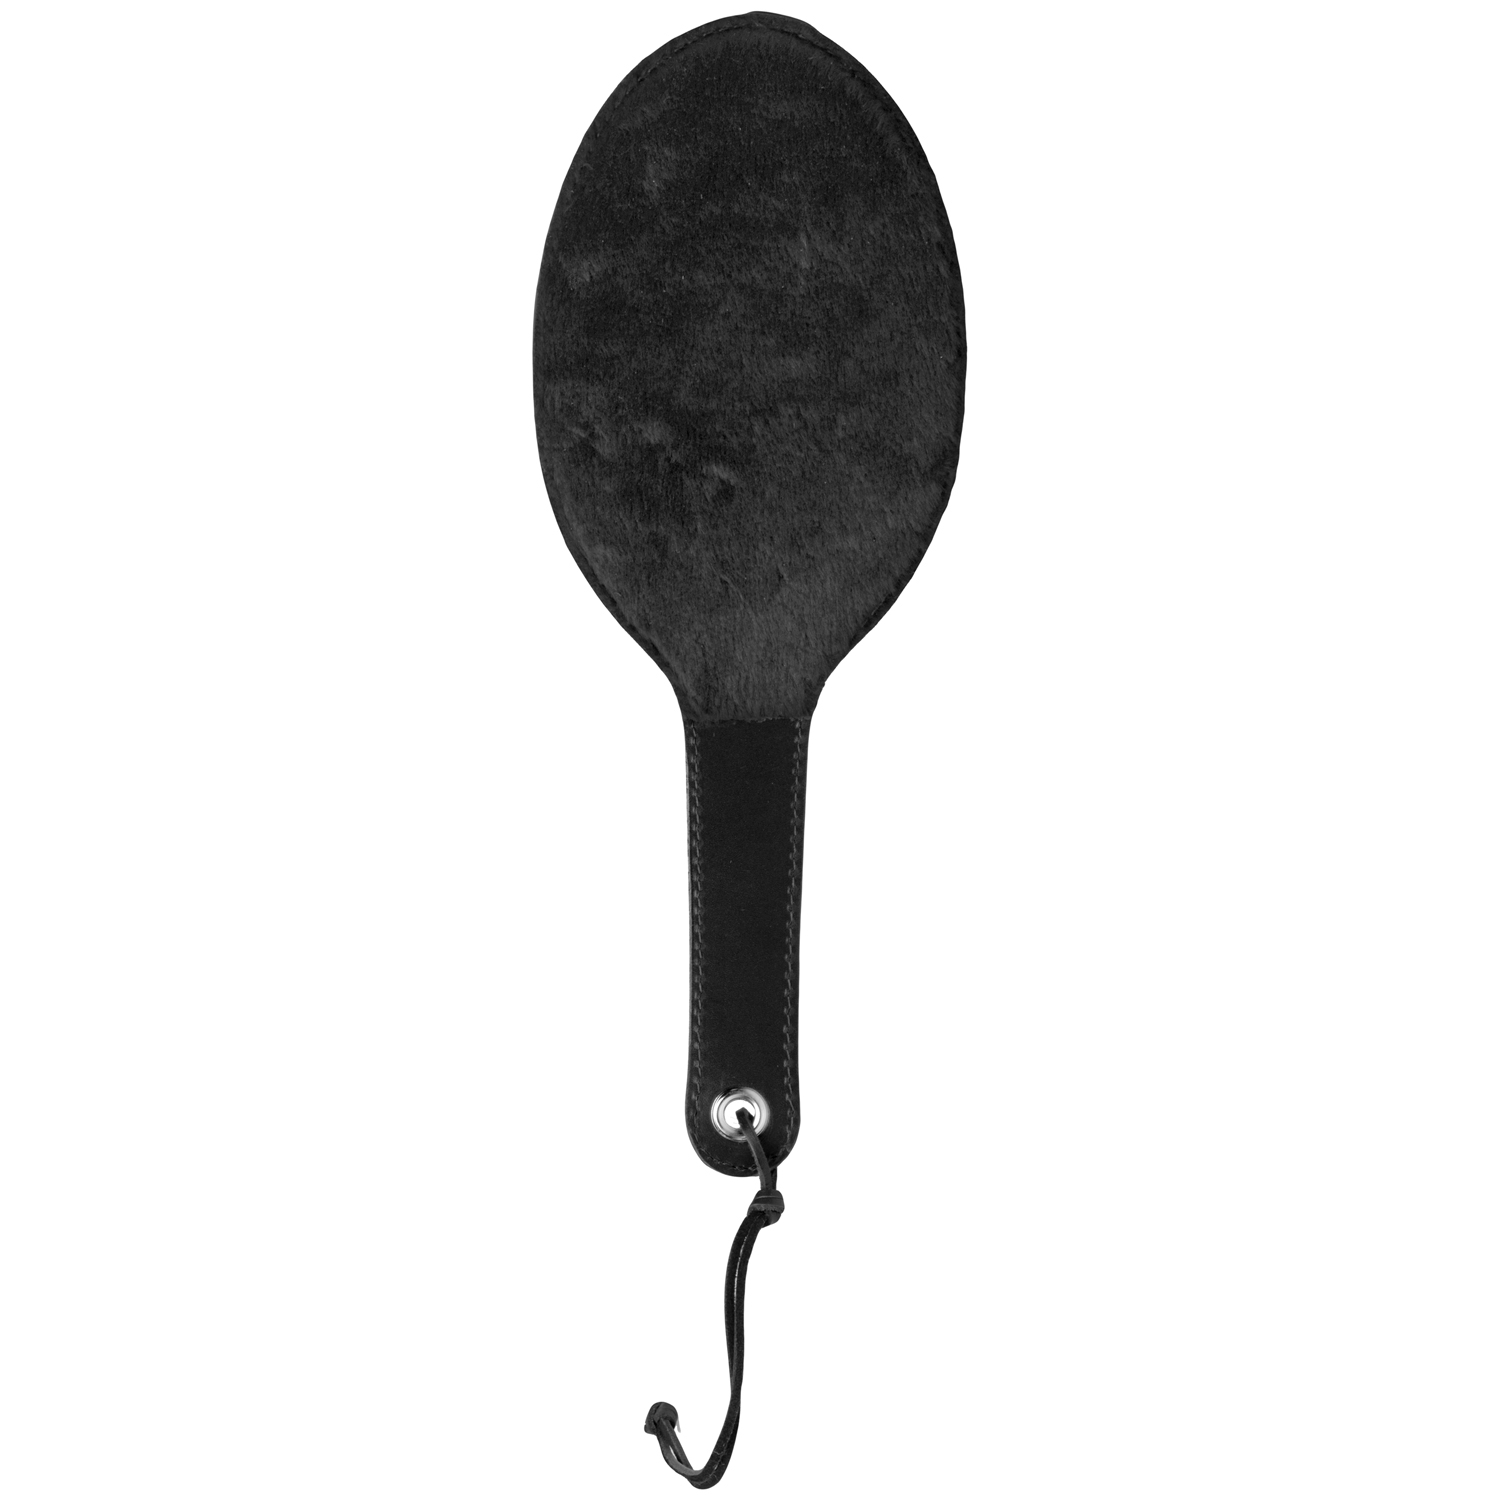 Strict Leather And Fur Round Paddle